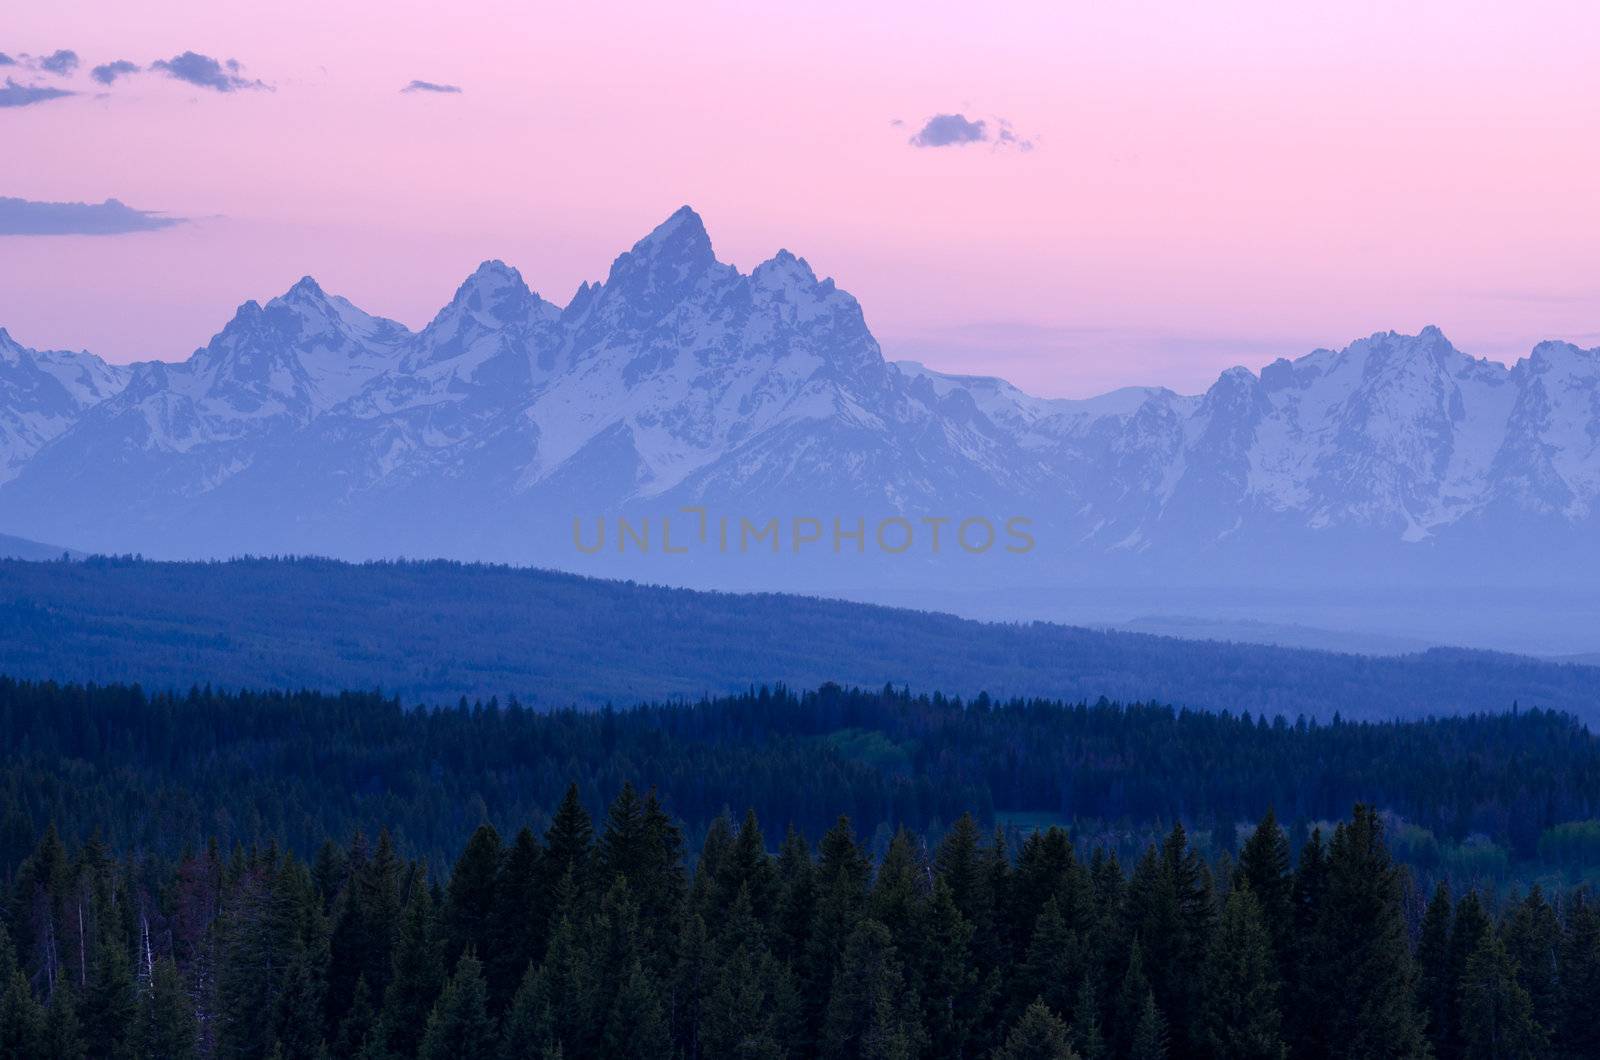 The Teton Mountains and forested ridges at twilight, Grand Teton National Park, Teton County, Wyoming, USA by CharlesBolin